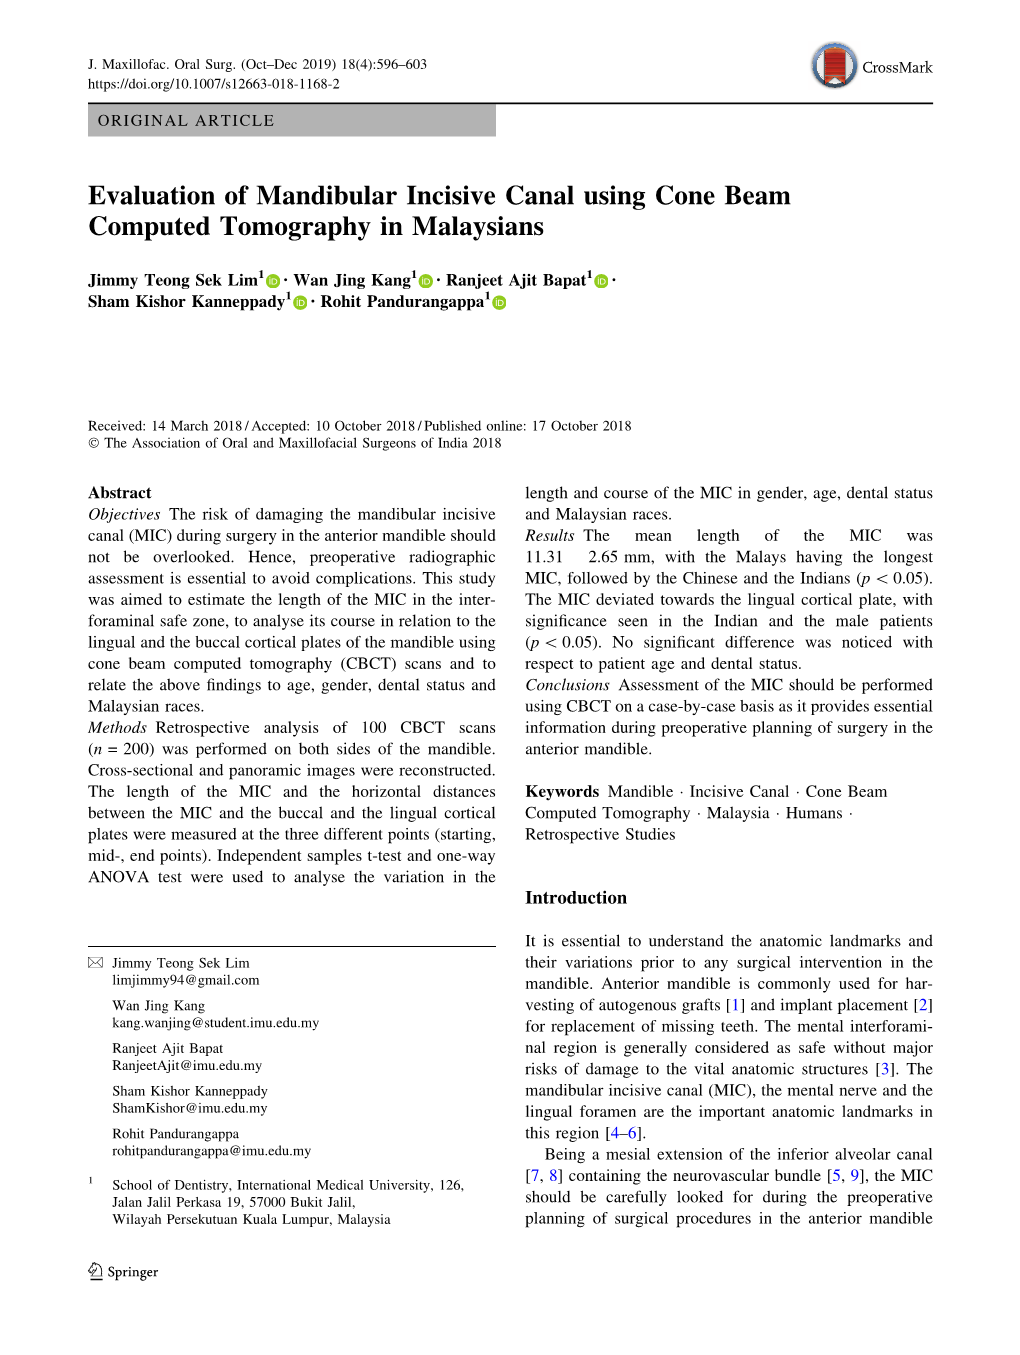 Evaluation of Mandibular Incisive Canal Using Cone Beam Computed Tomography in Malaysians